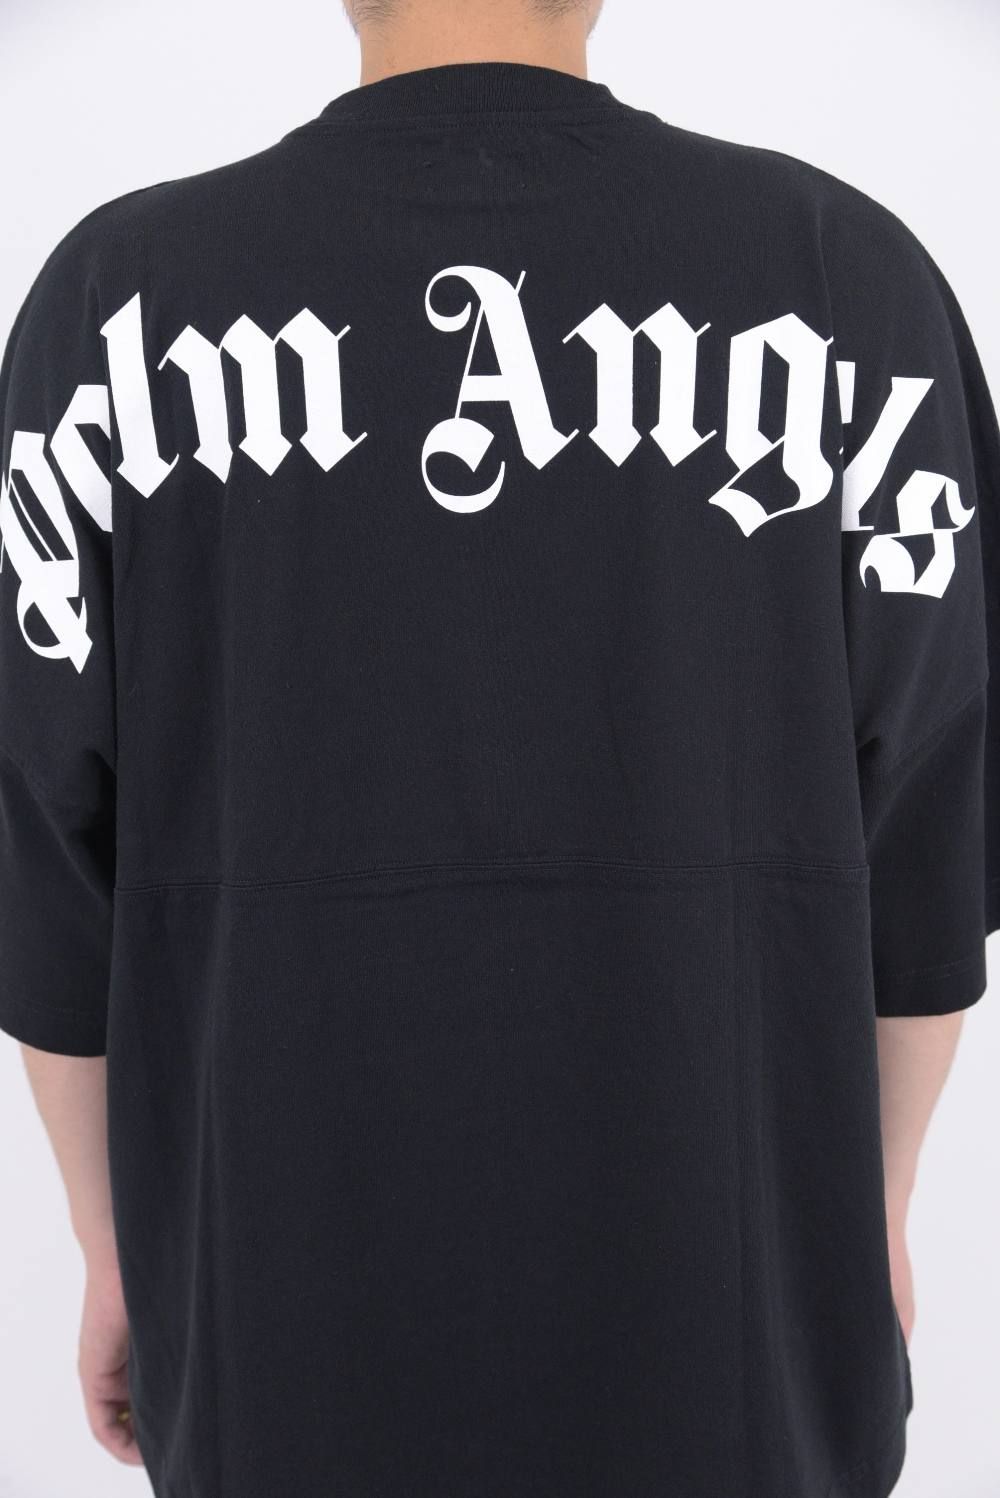 PALM ANGELS - LOGO OVER TEE BLACK / プリント クルーネック ロングT 